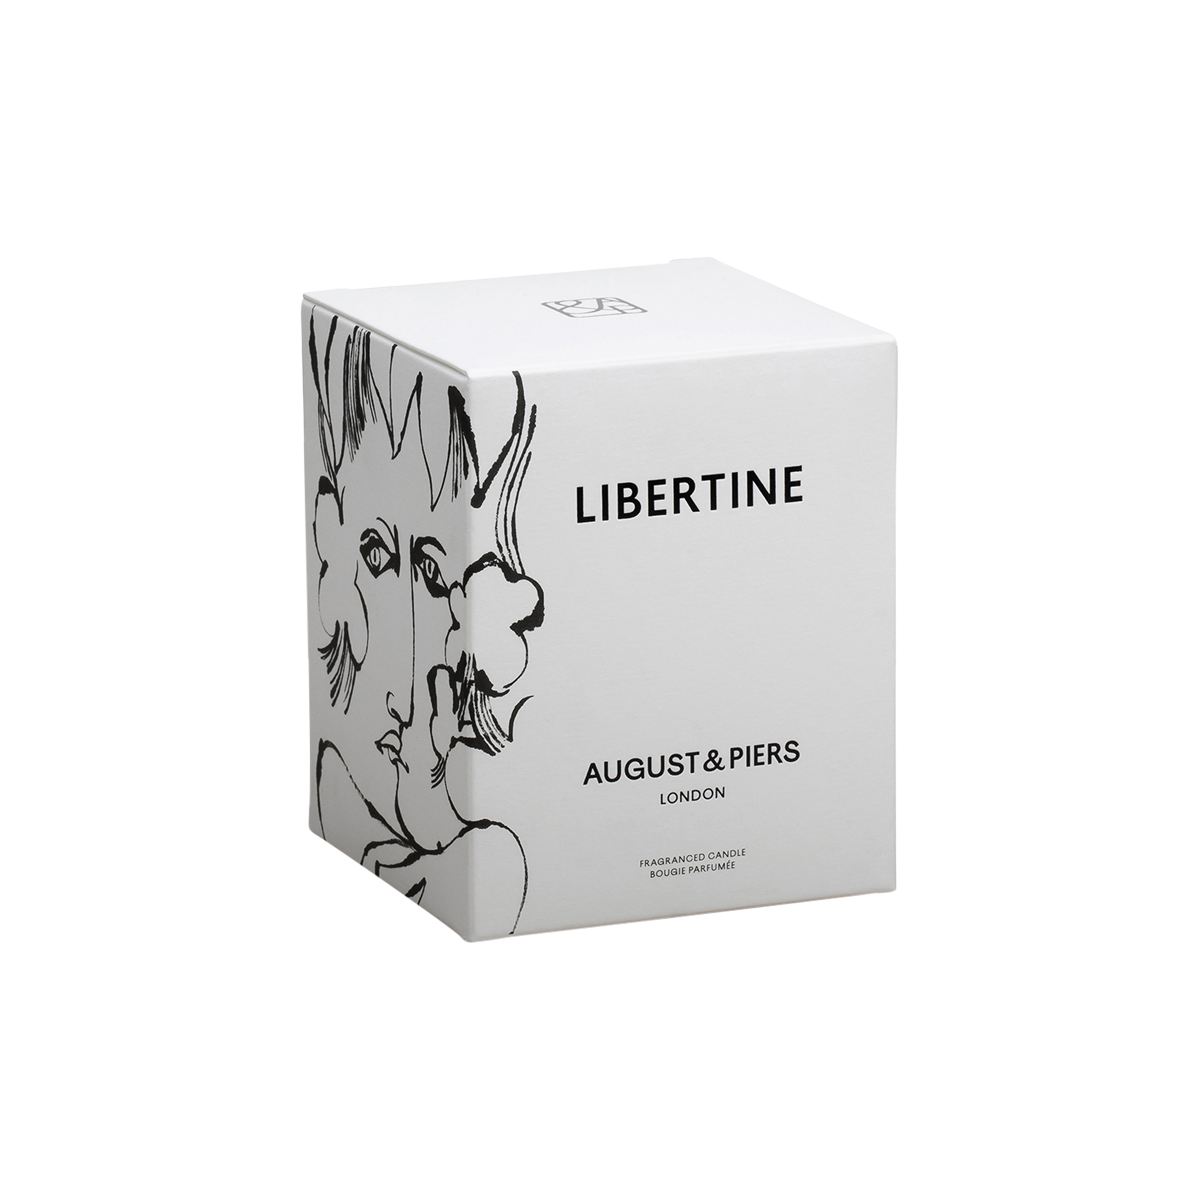 AUGUST&PIERS - Libertine Scented Candle